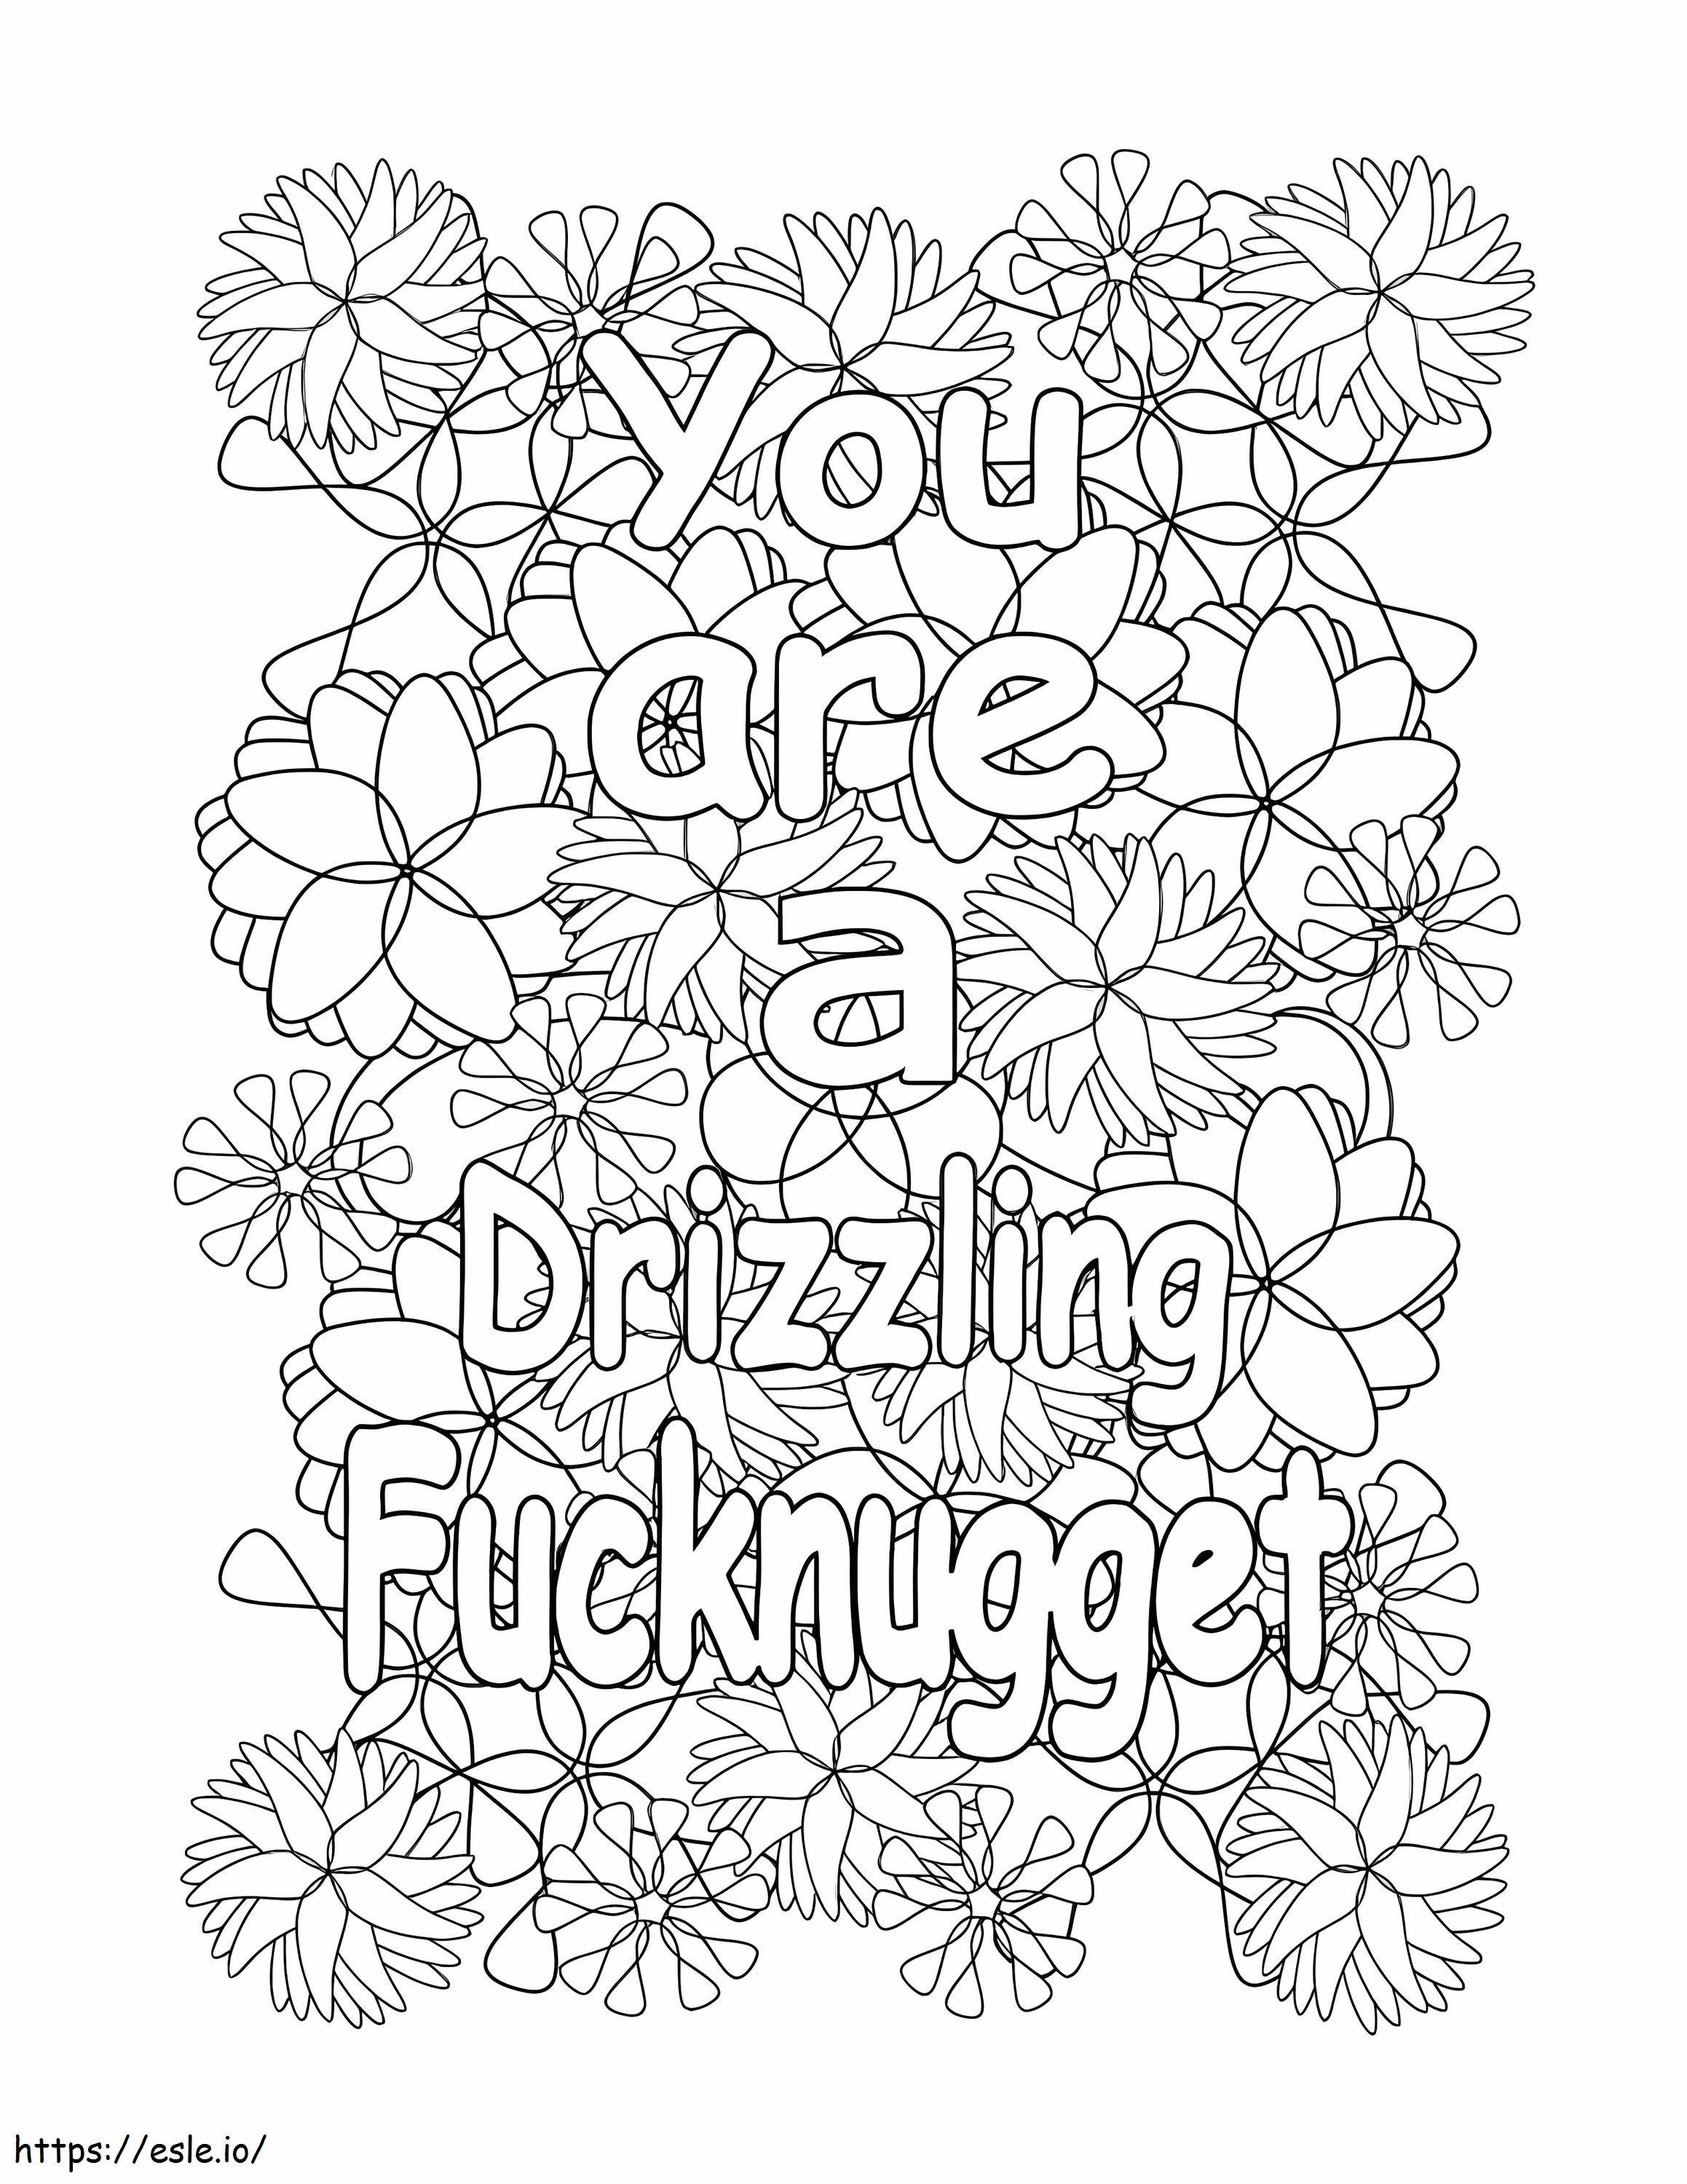 You Are A Drizzling Fucknugget coloring page